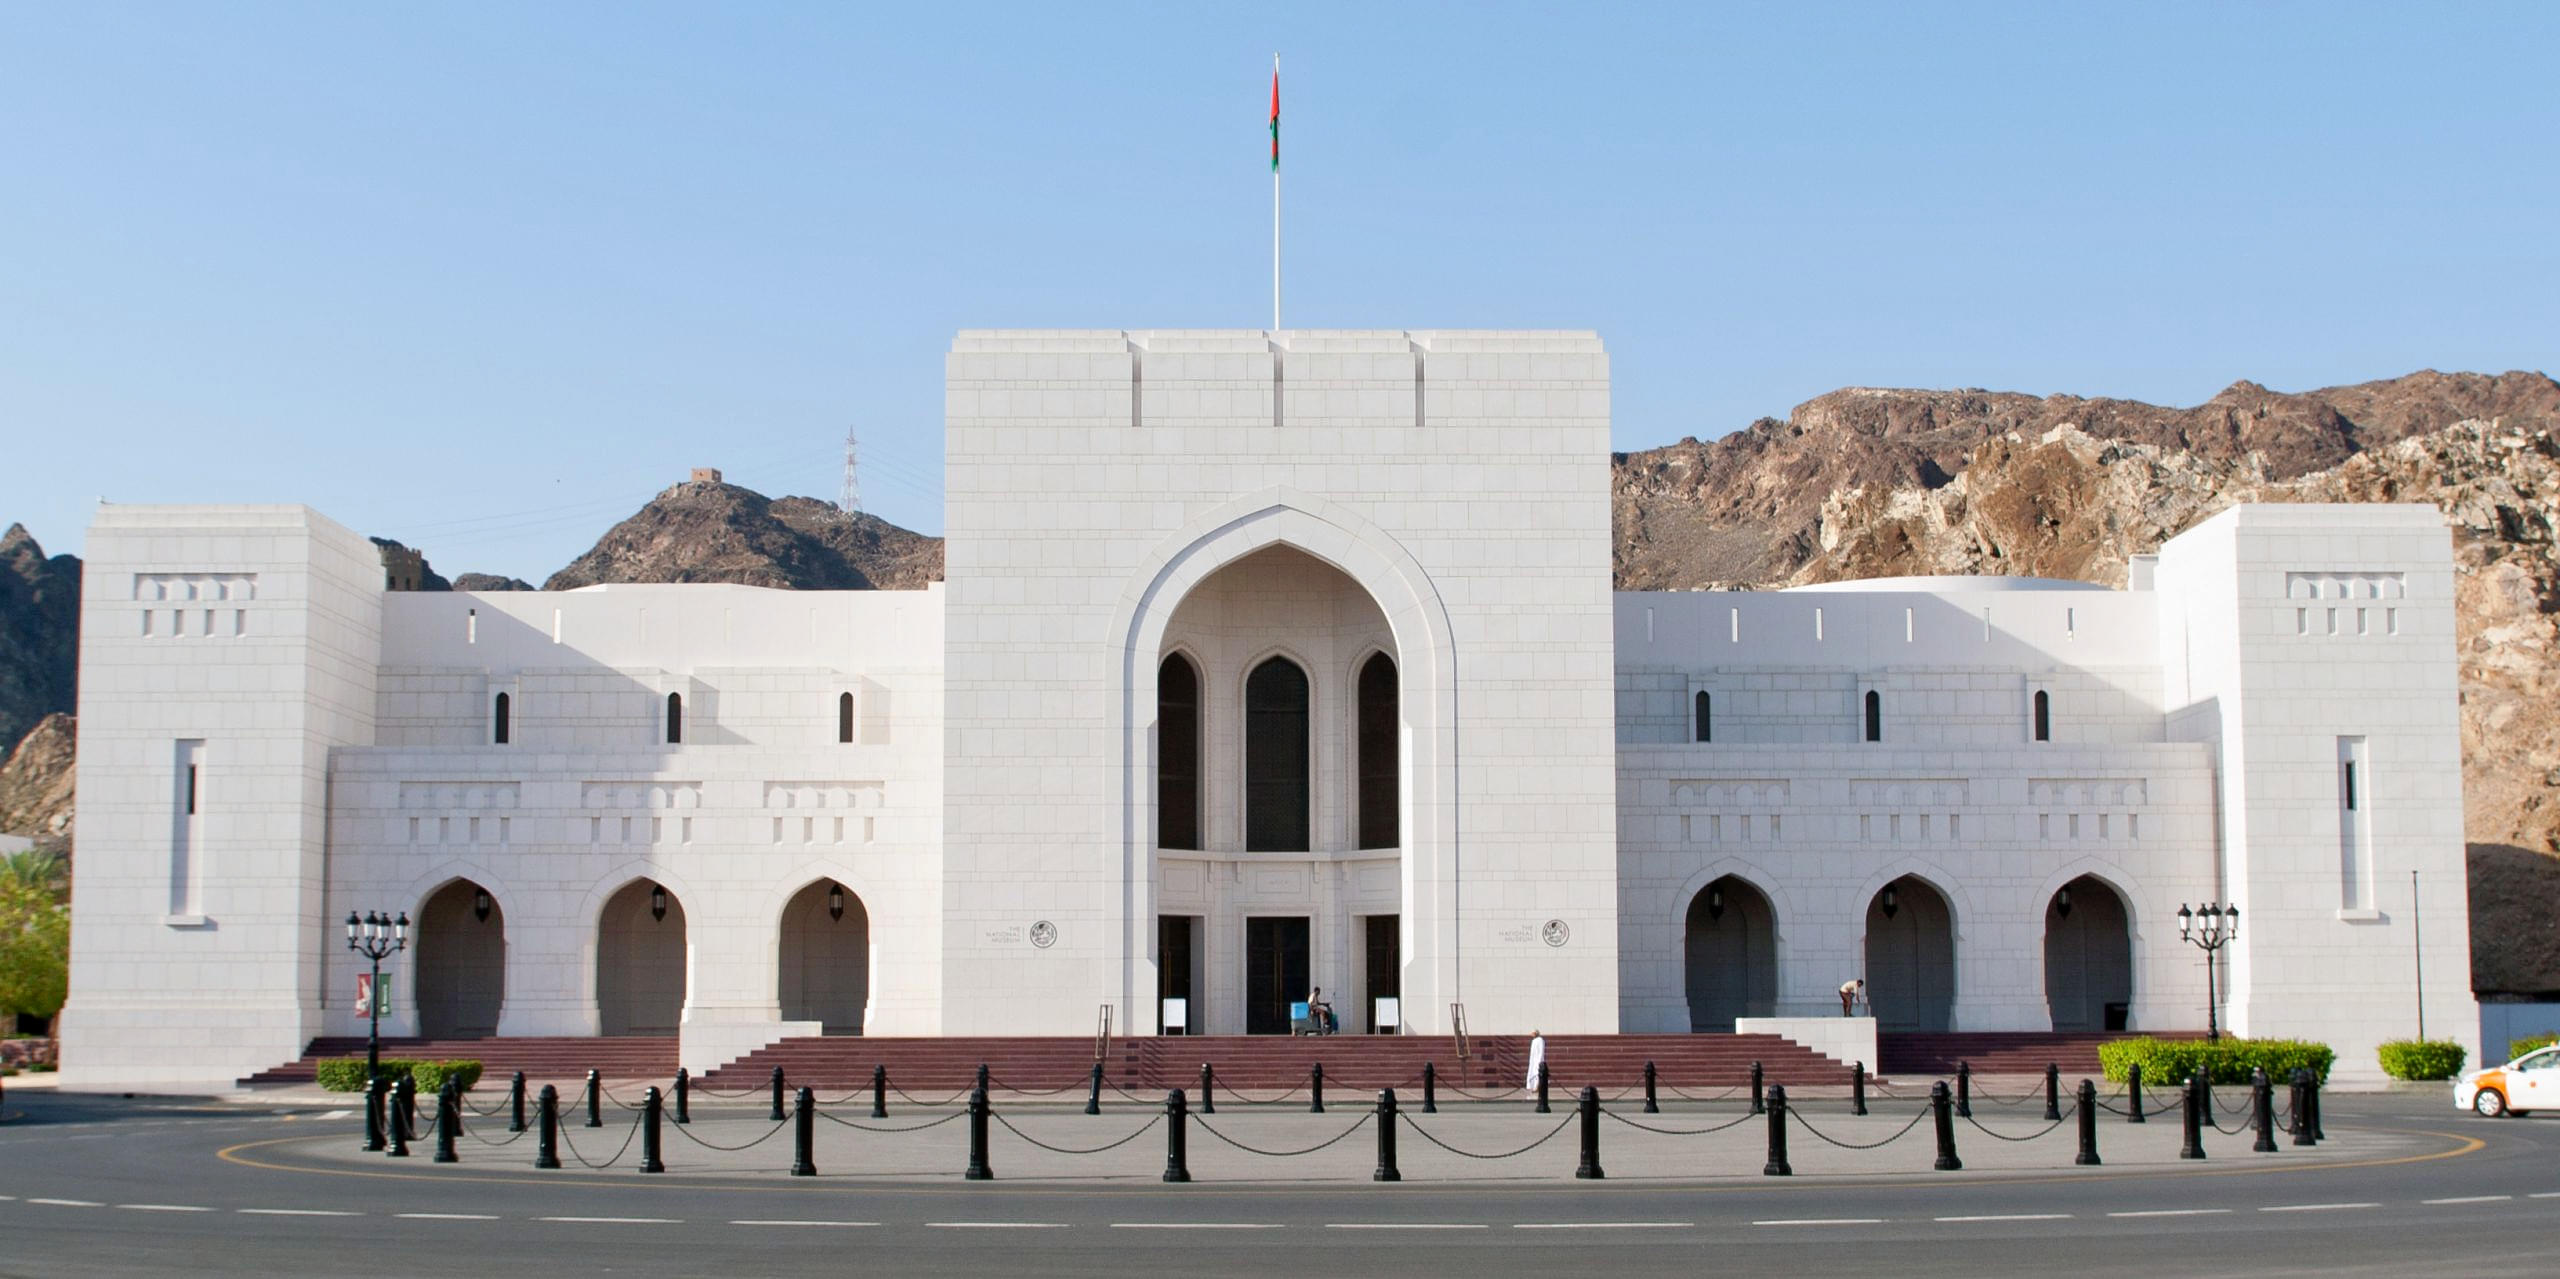 The National Museum Of Oman